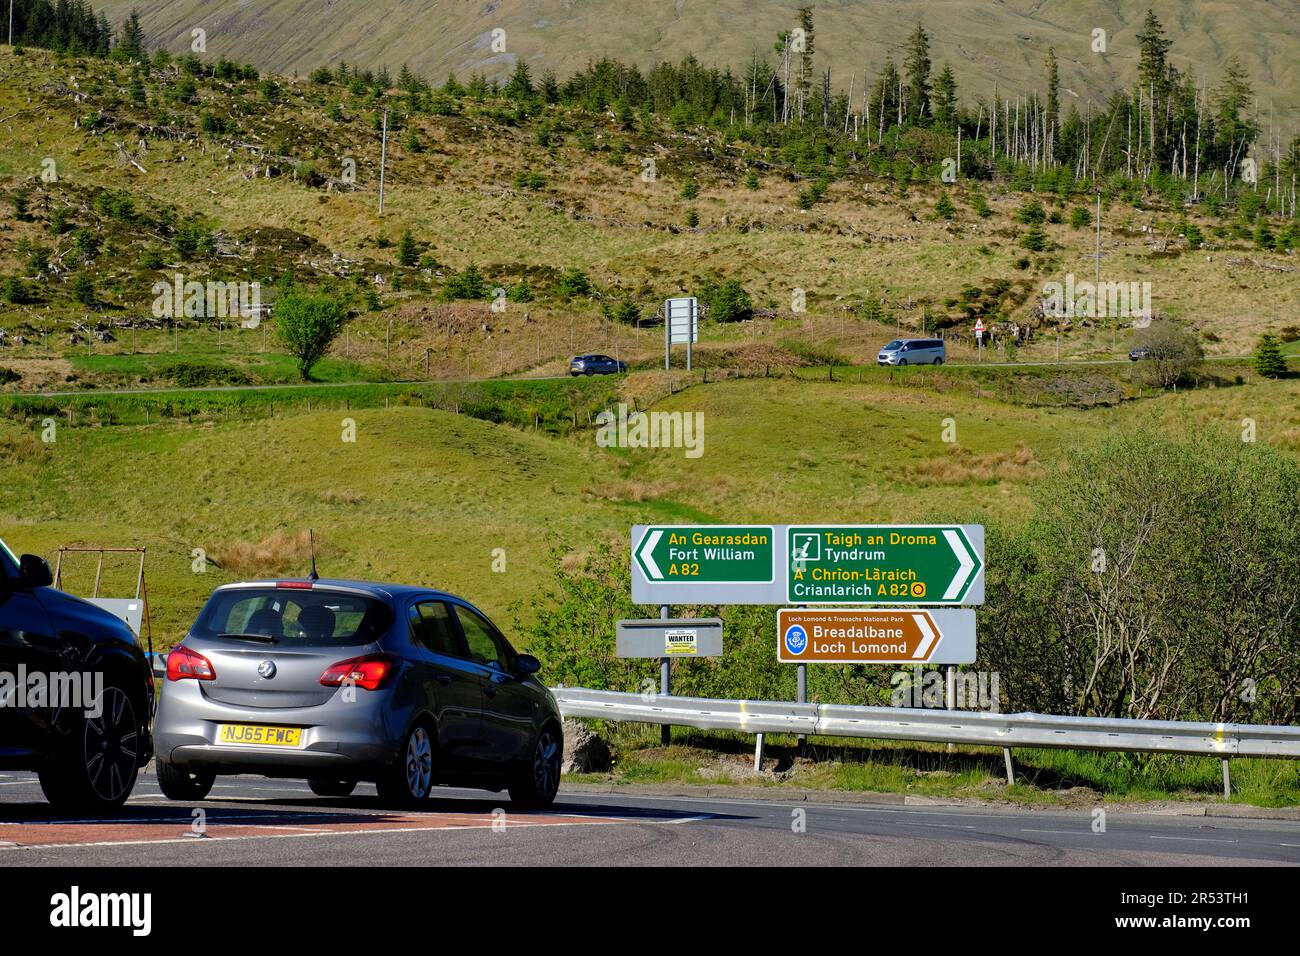 Clear blue skies and bright sunshine at Tyndrum, seen at the junction for the A82 road to Fort William and Crianlarich, Tyndrum, Scotland Stock Photo